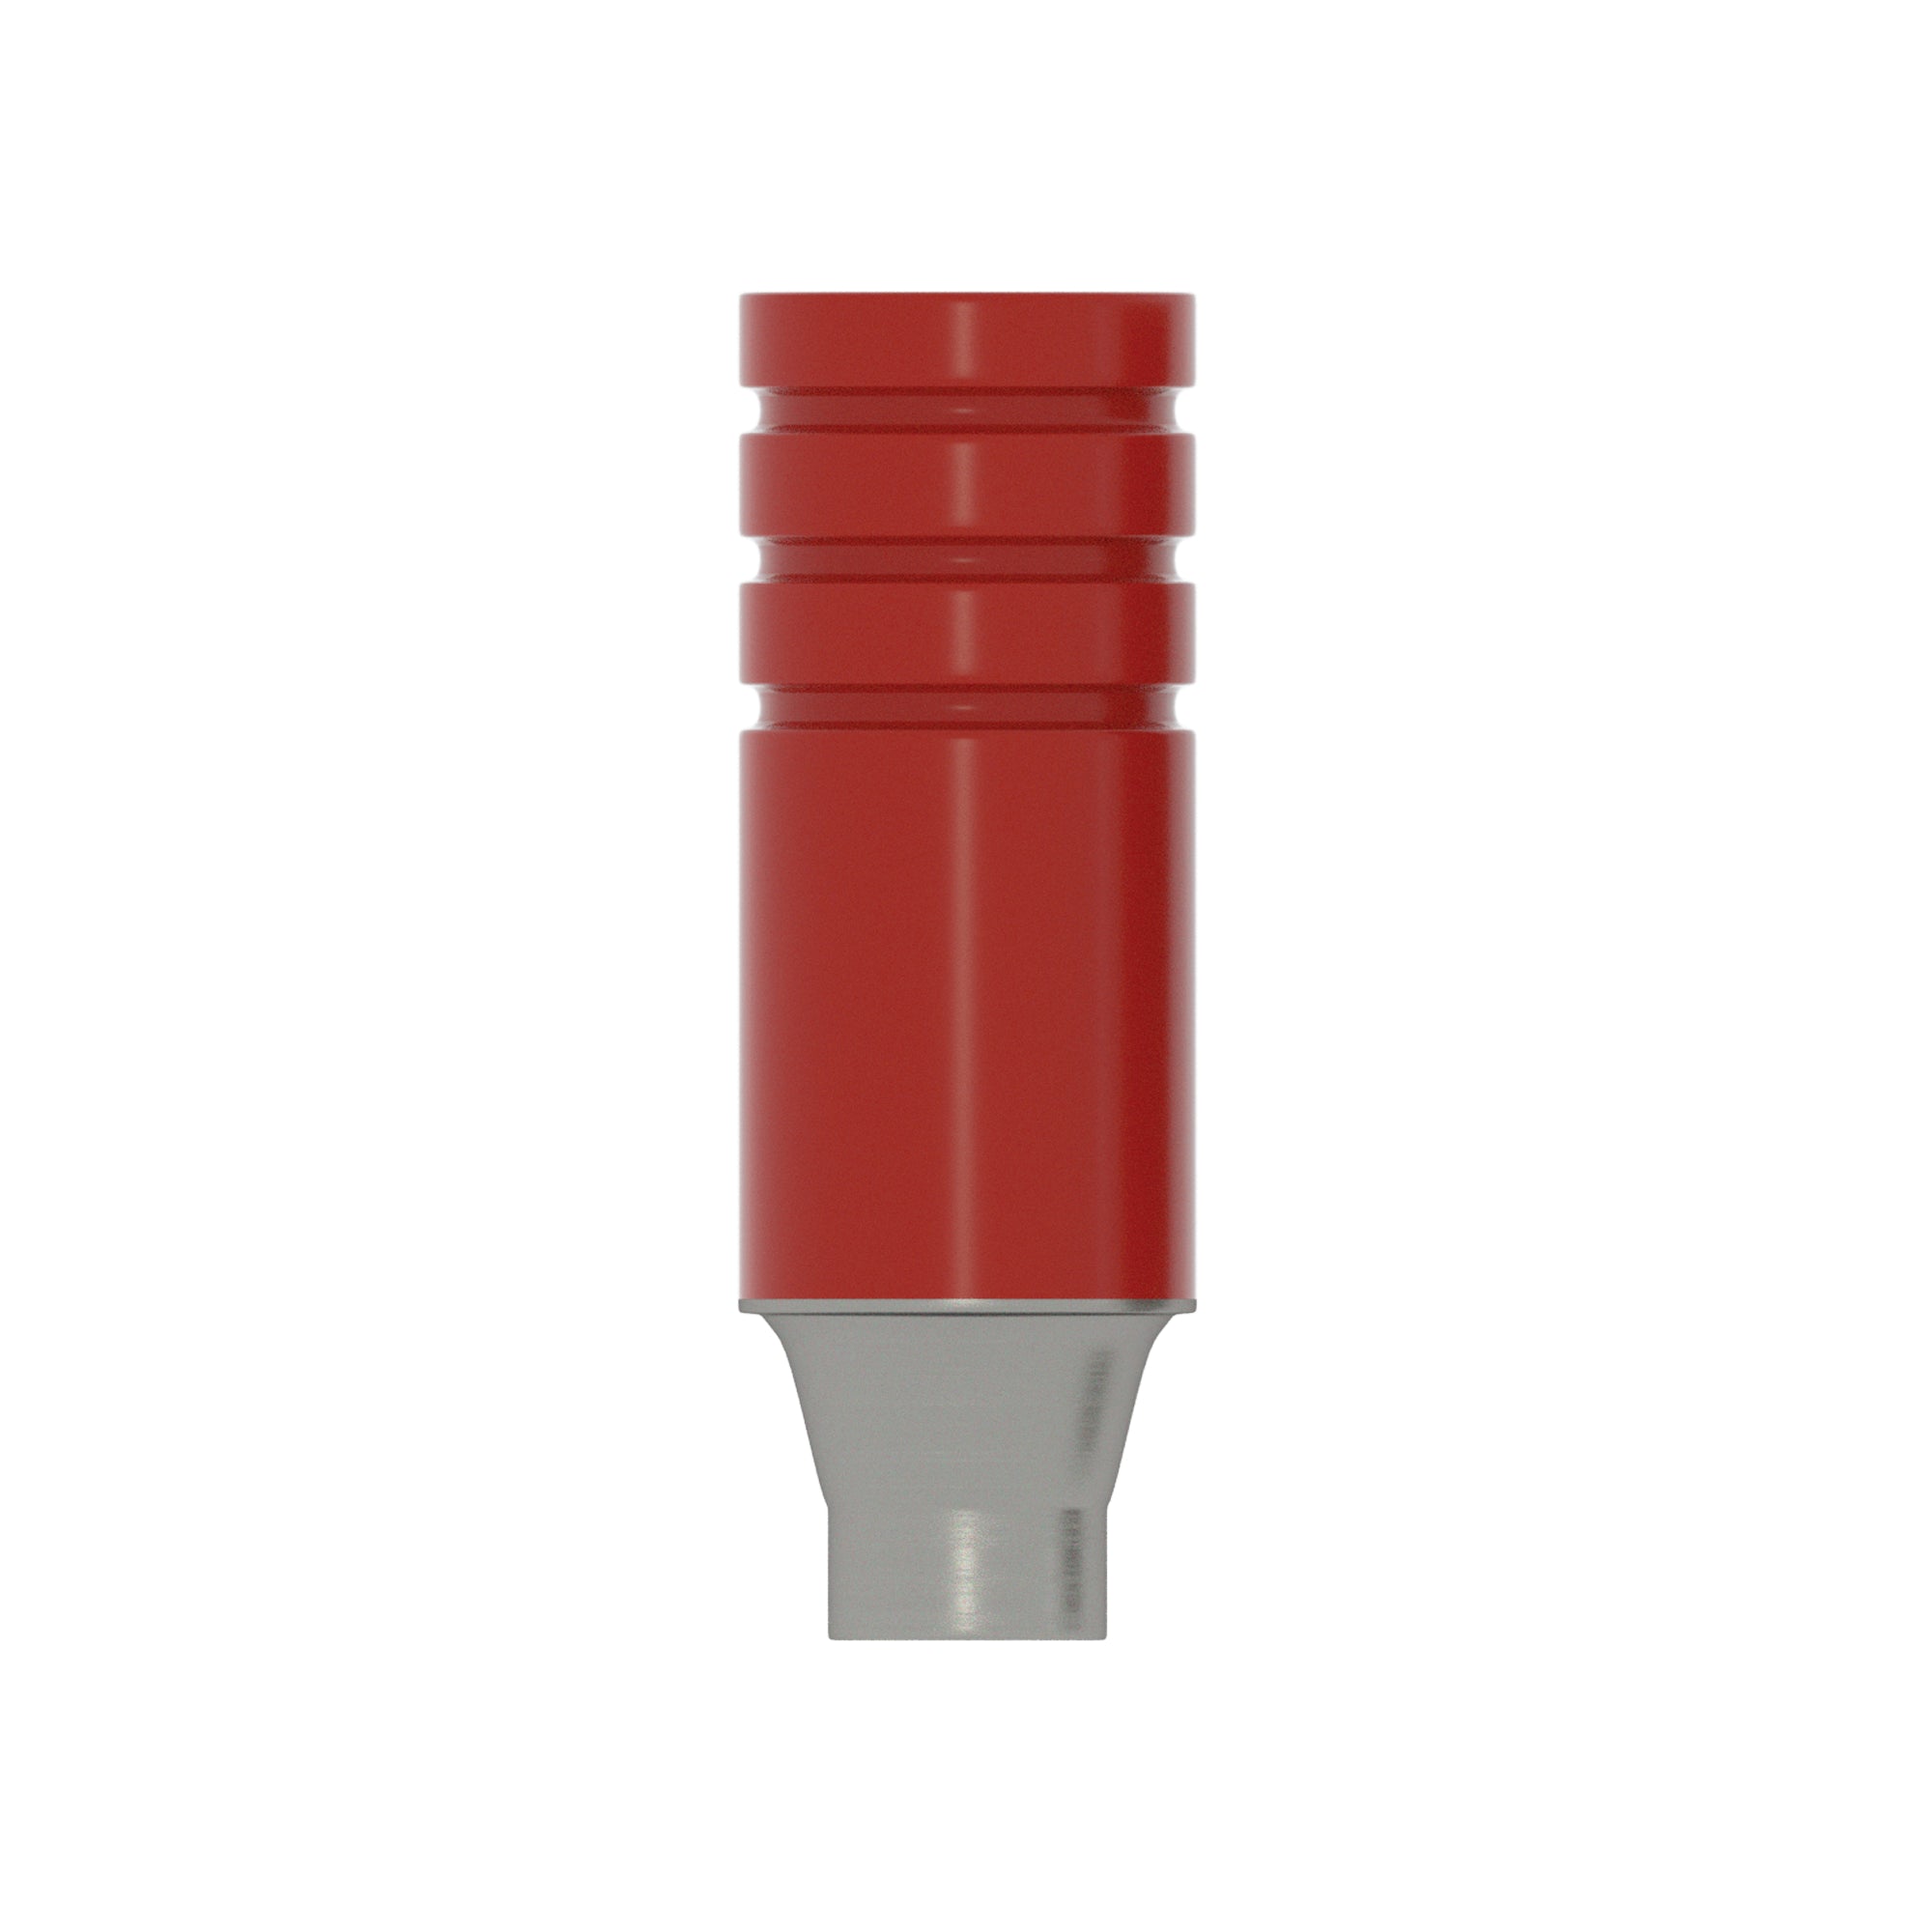 DSI Straight Castable CoCr Abutment Rotational (UCLA) 4.5mm -Conical Connection RP Ø4.3mm-5.0mm